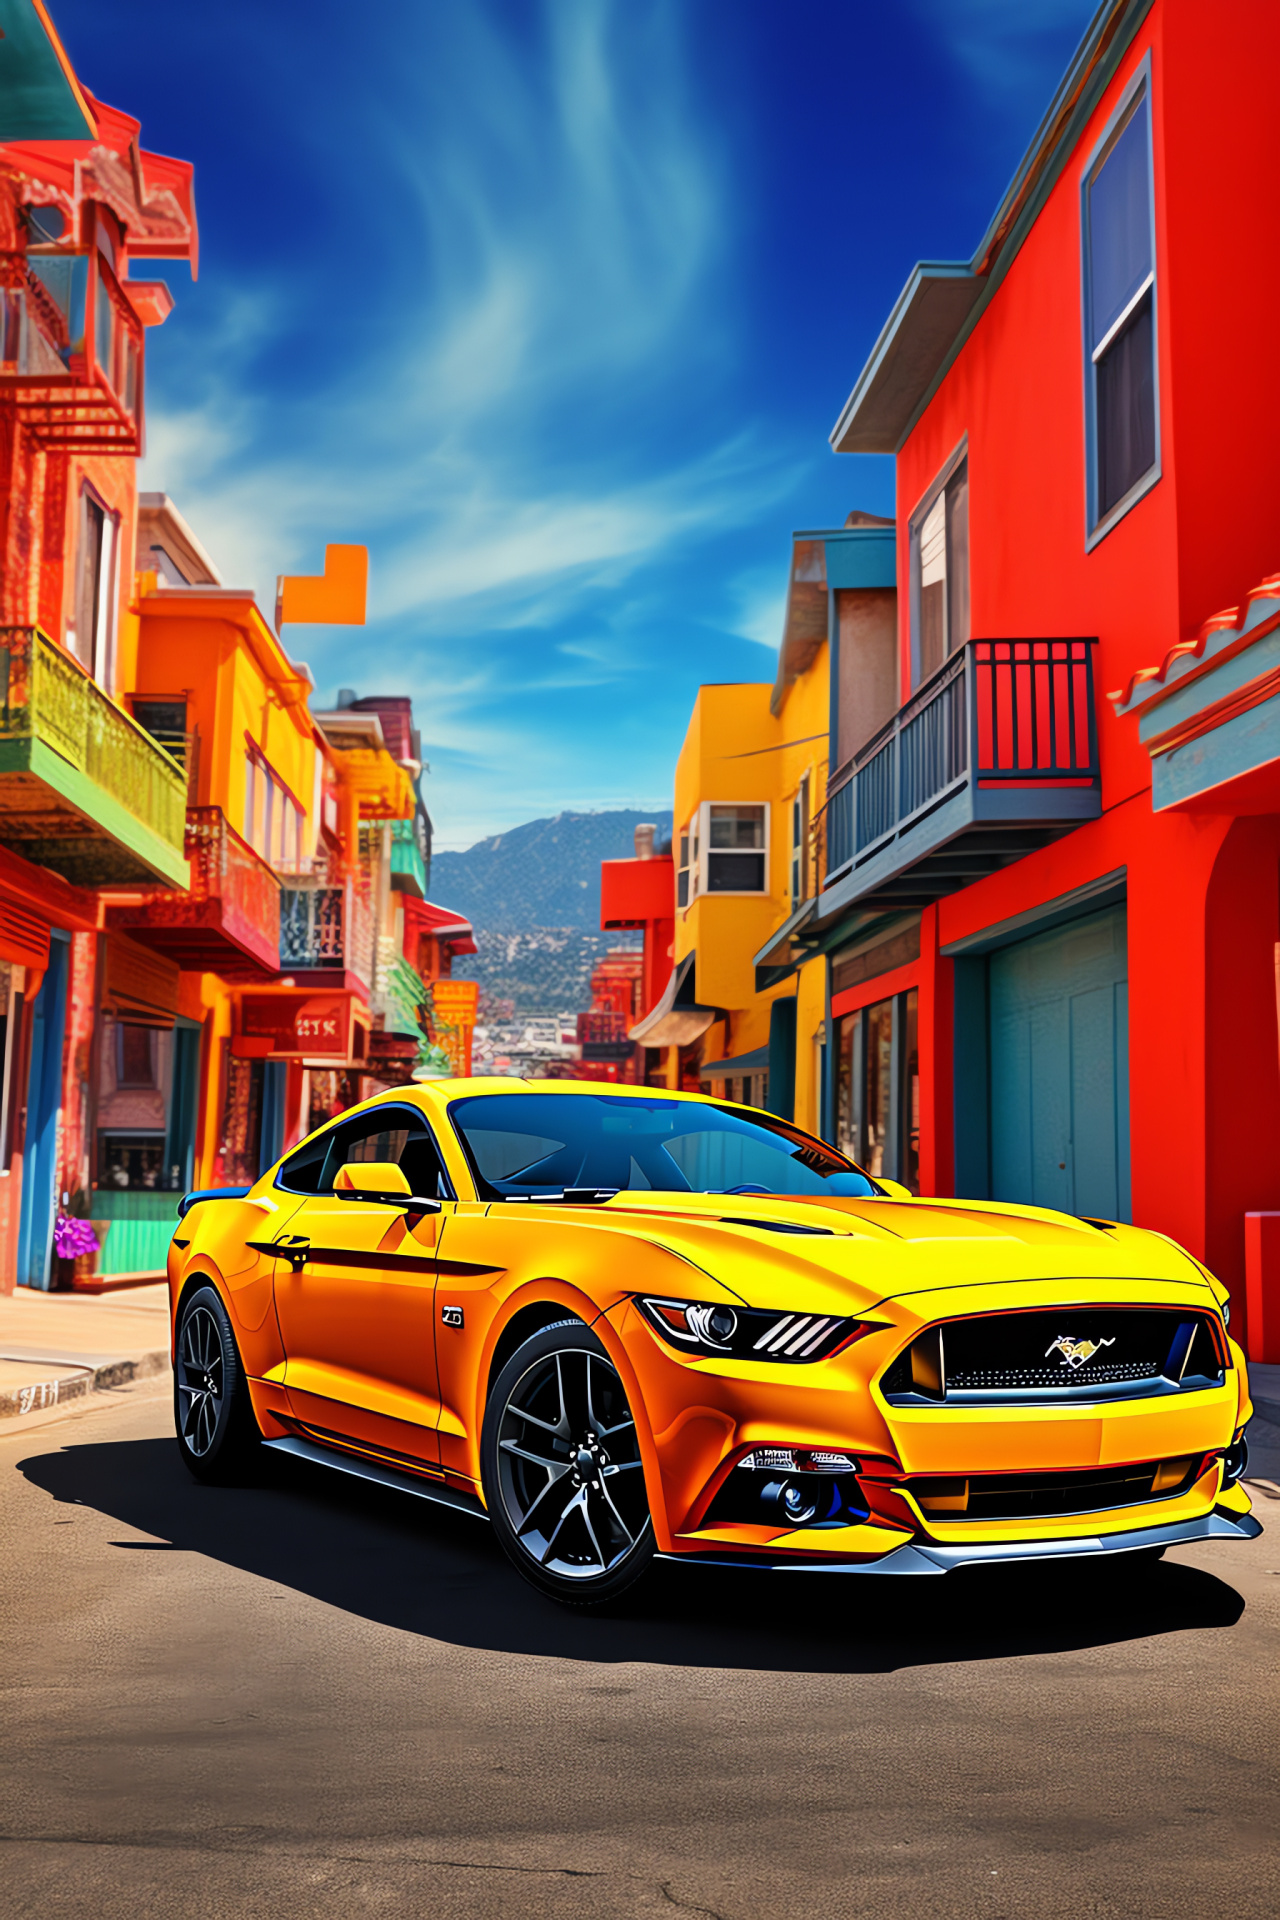 Ford Mustang, Backdrop of vibrancy, Mustang boldness, American car character, Muscle car, HD Phone Wallpaper